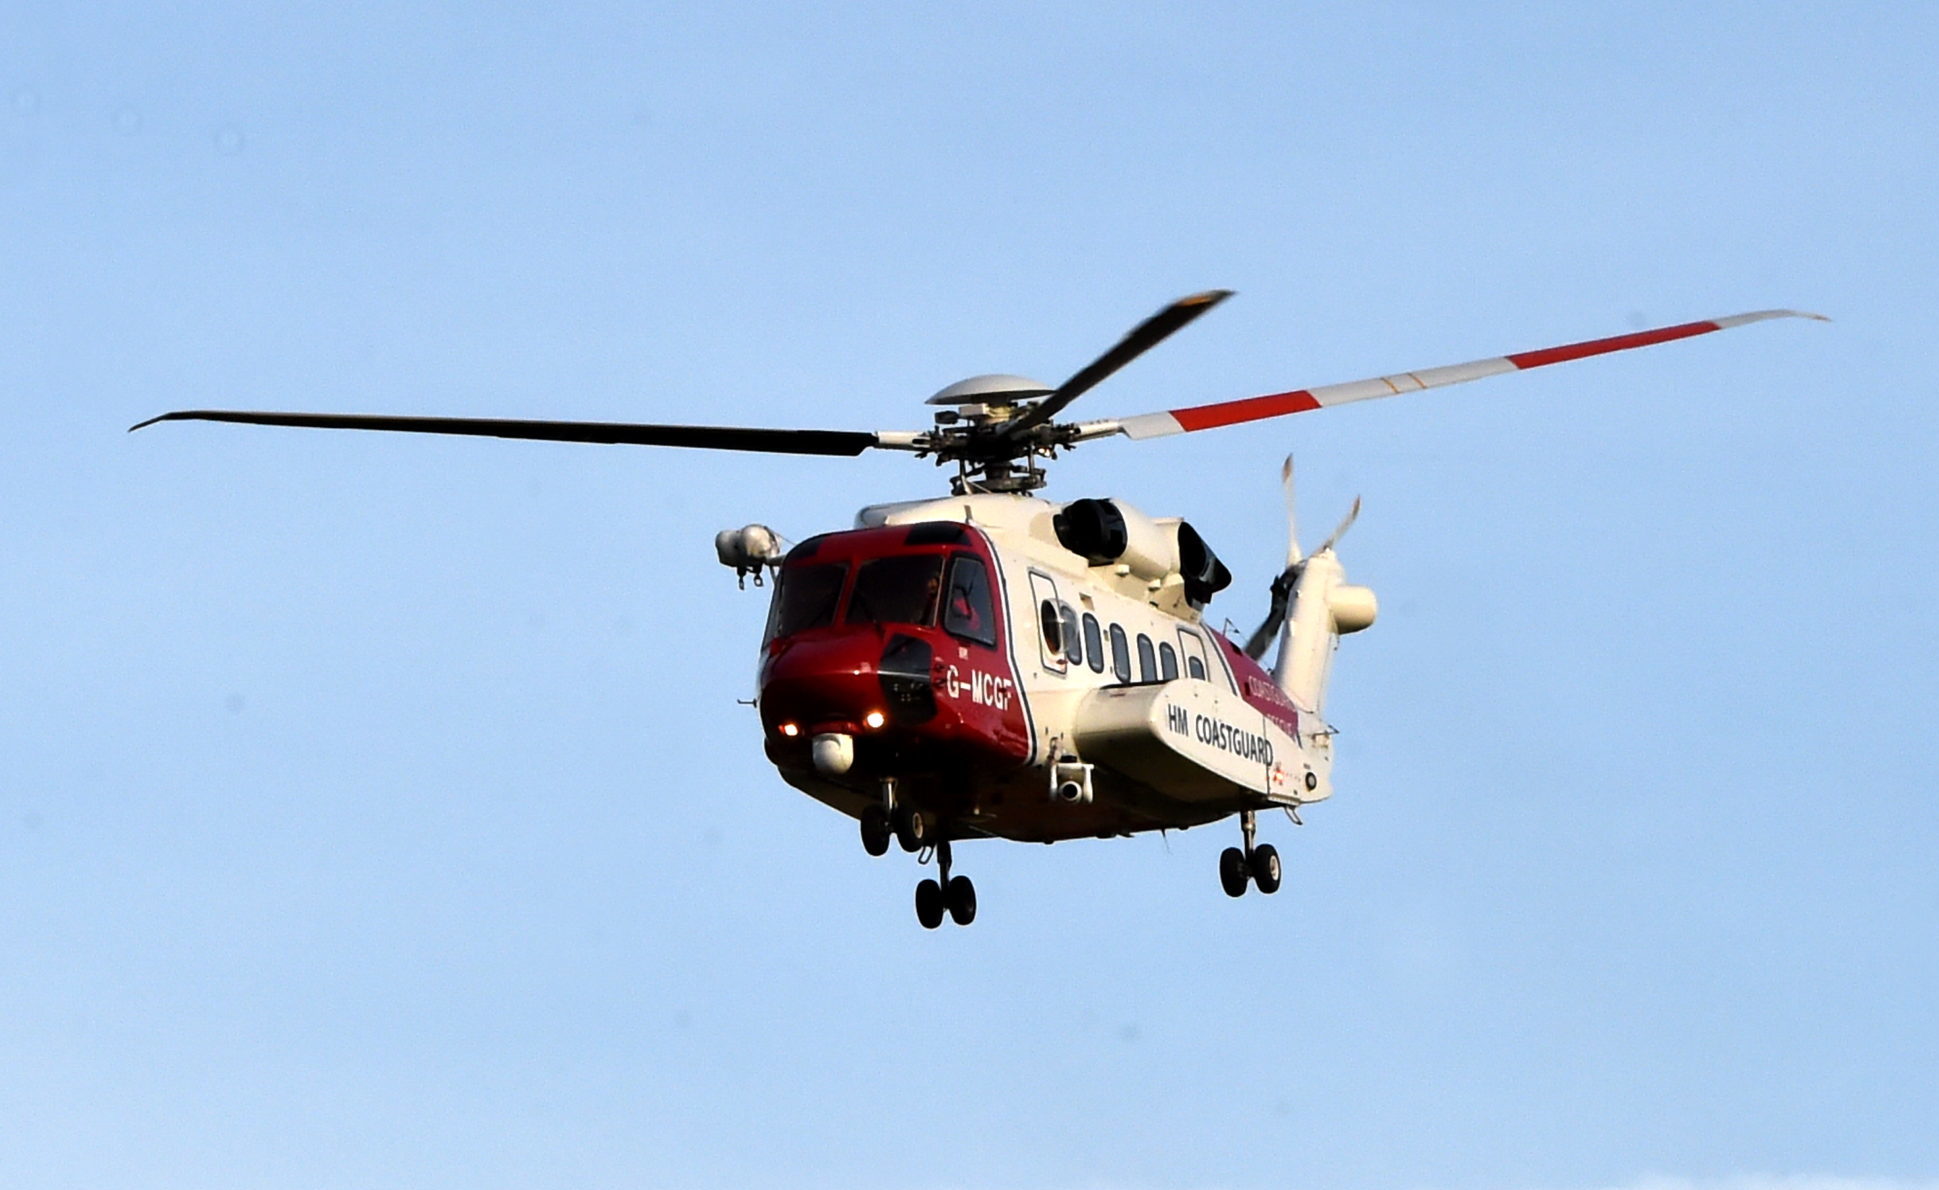 A search and rescue helicopter